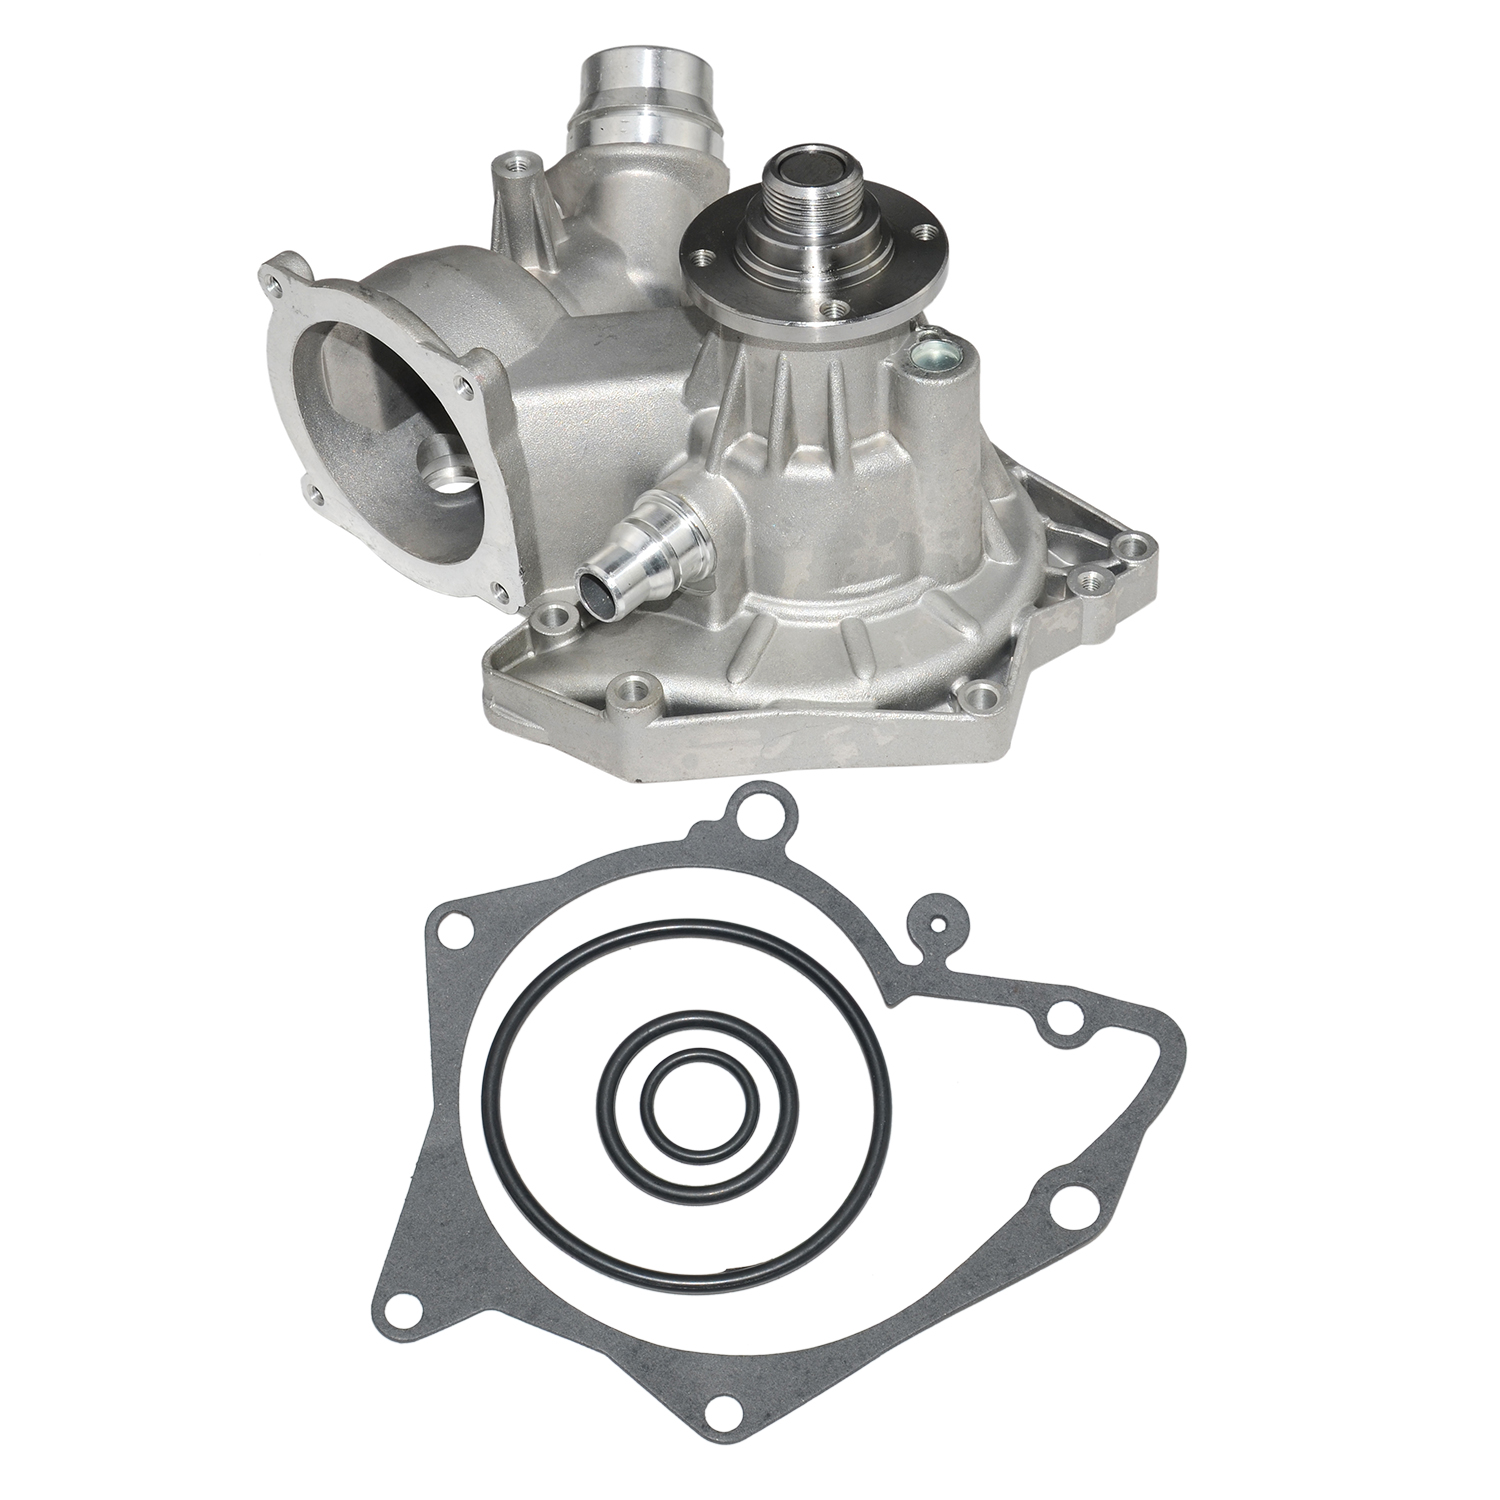 11510393336 For BMW X5 E53 E39 E63 E64 540i 545i 645Ci 4.4L Water Pump 11511713266 11511742598 8510324 PEB000030 - image 2 of 10